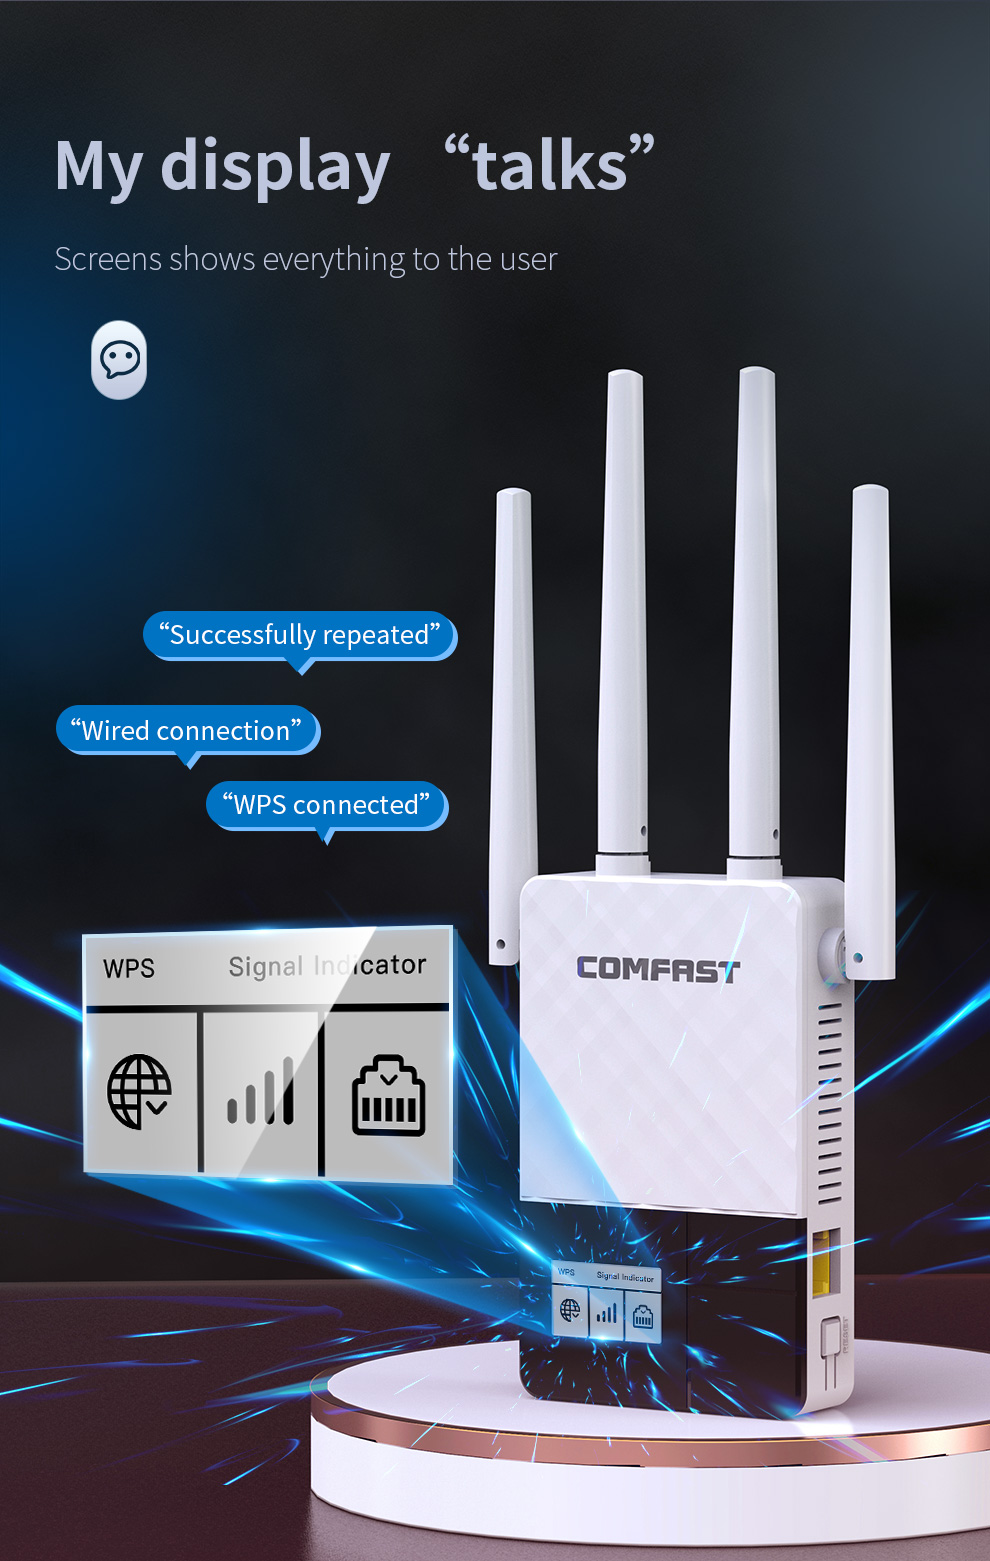 Comfast 760Ac Wifi Repeater 1200Mbps Wifi Rang Extender Dual-Band Gigabit Router Booster Extender Router with 4 Network Antennas